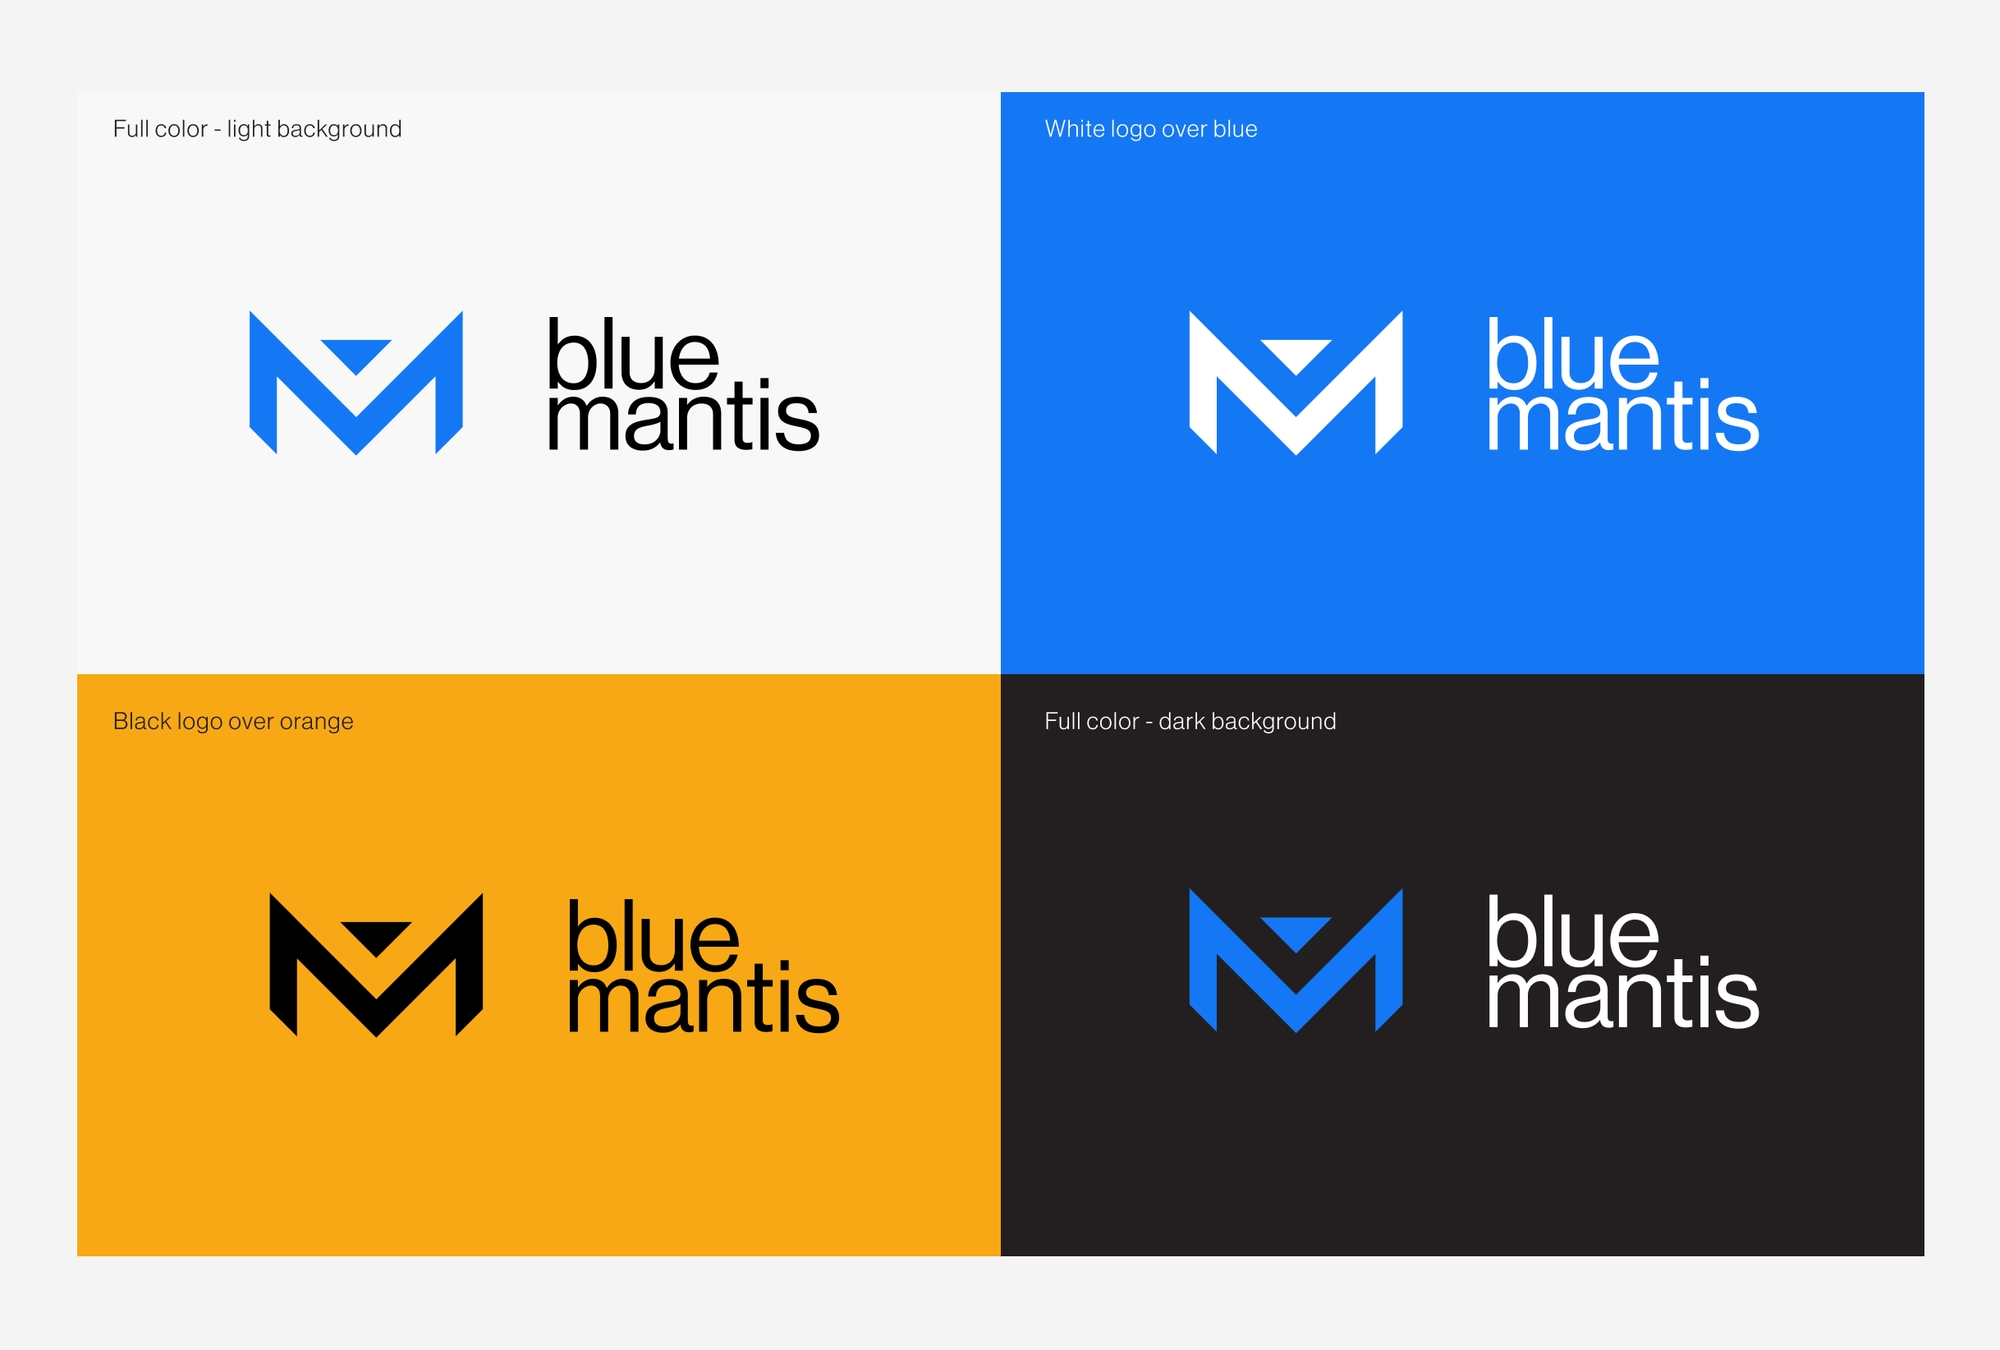 4 Blue Mantis logos with different colors